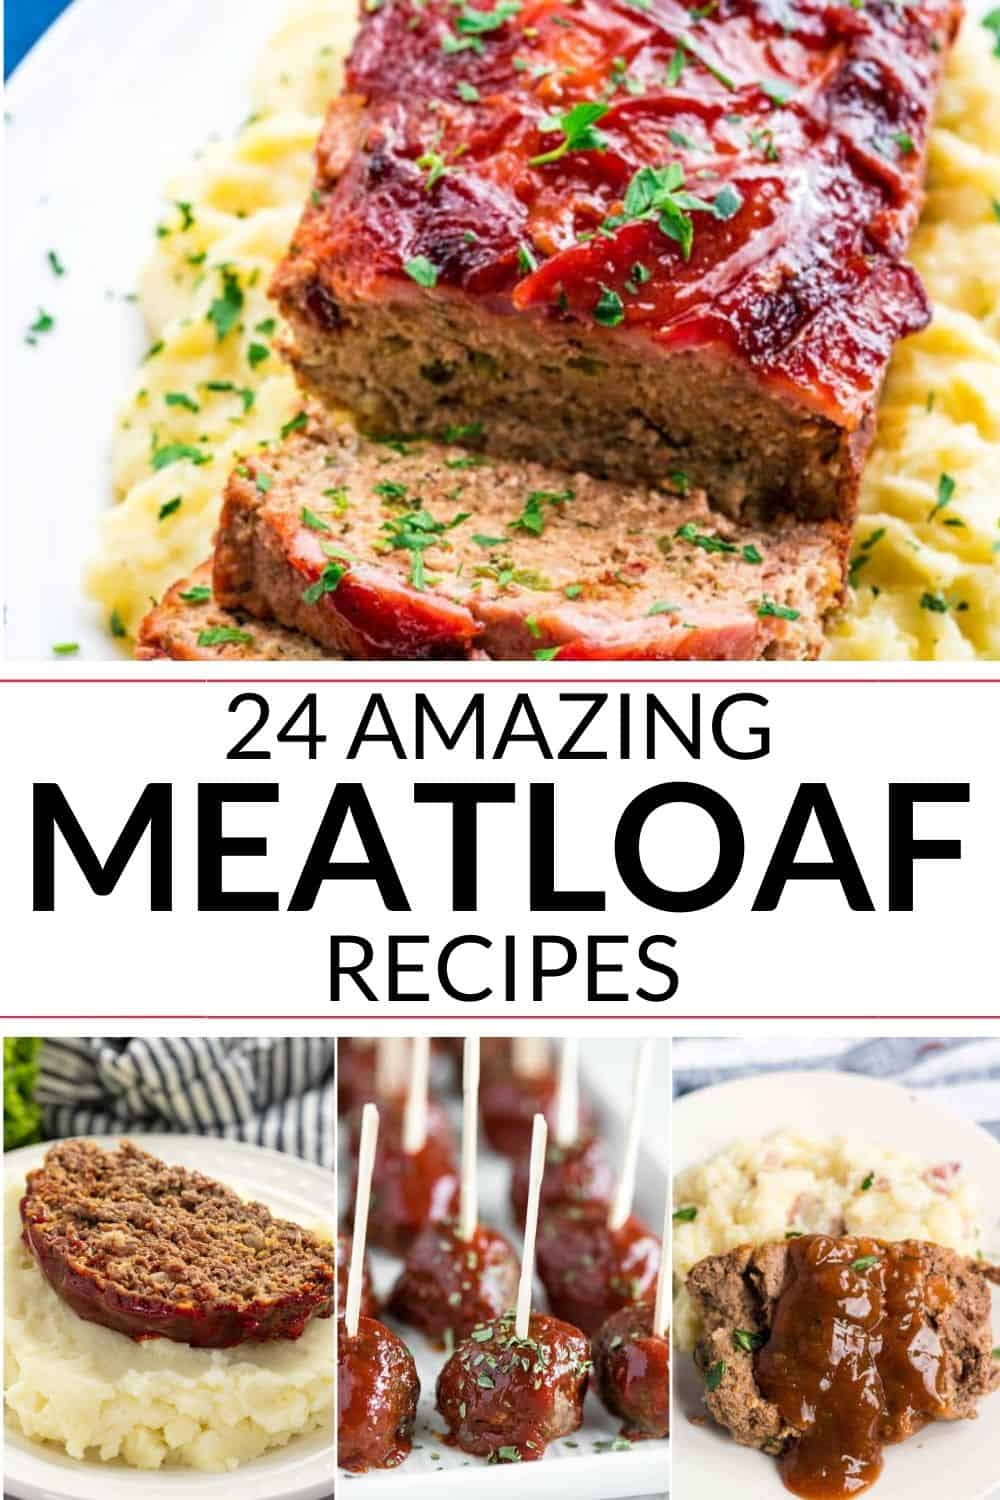 COLLECTION OF BEST MEATLOAF RECIPES